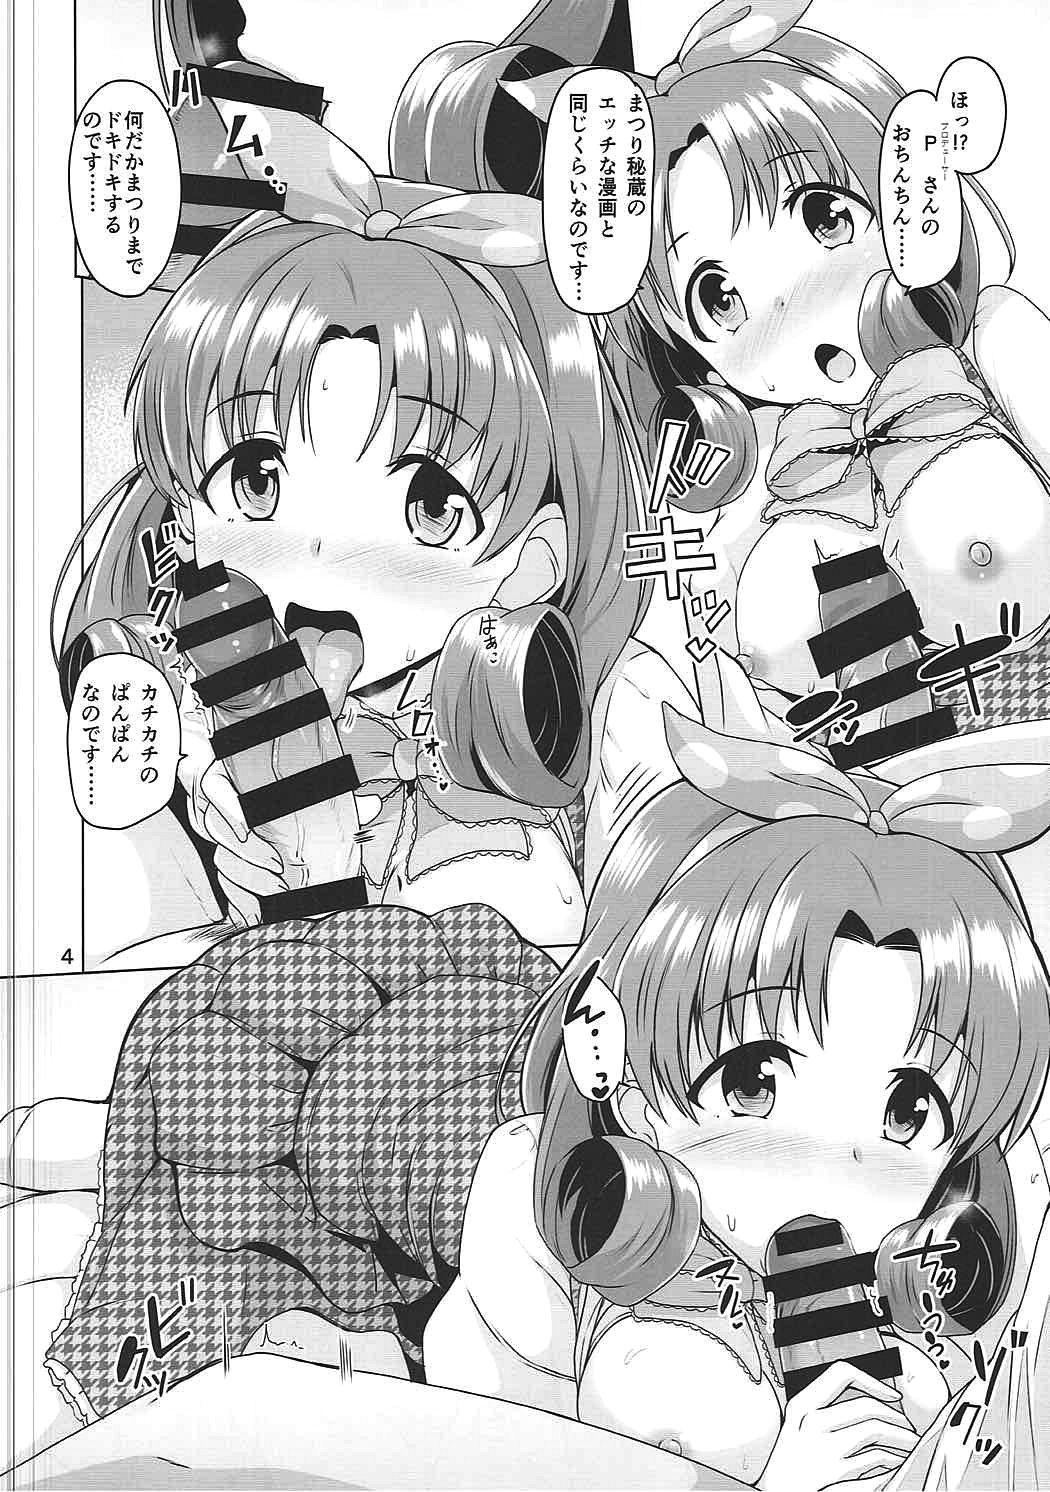 Off Princess? or Maria? - The idolmaster Cam Girl - Page 5